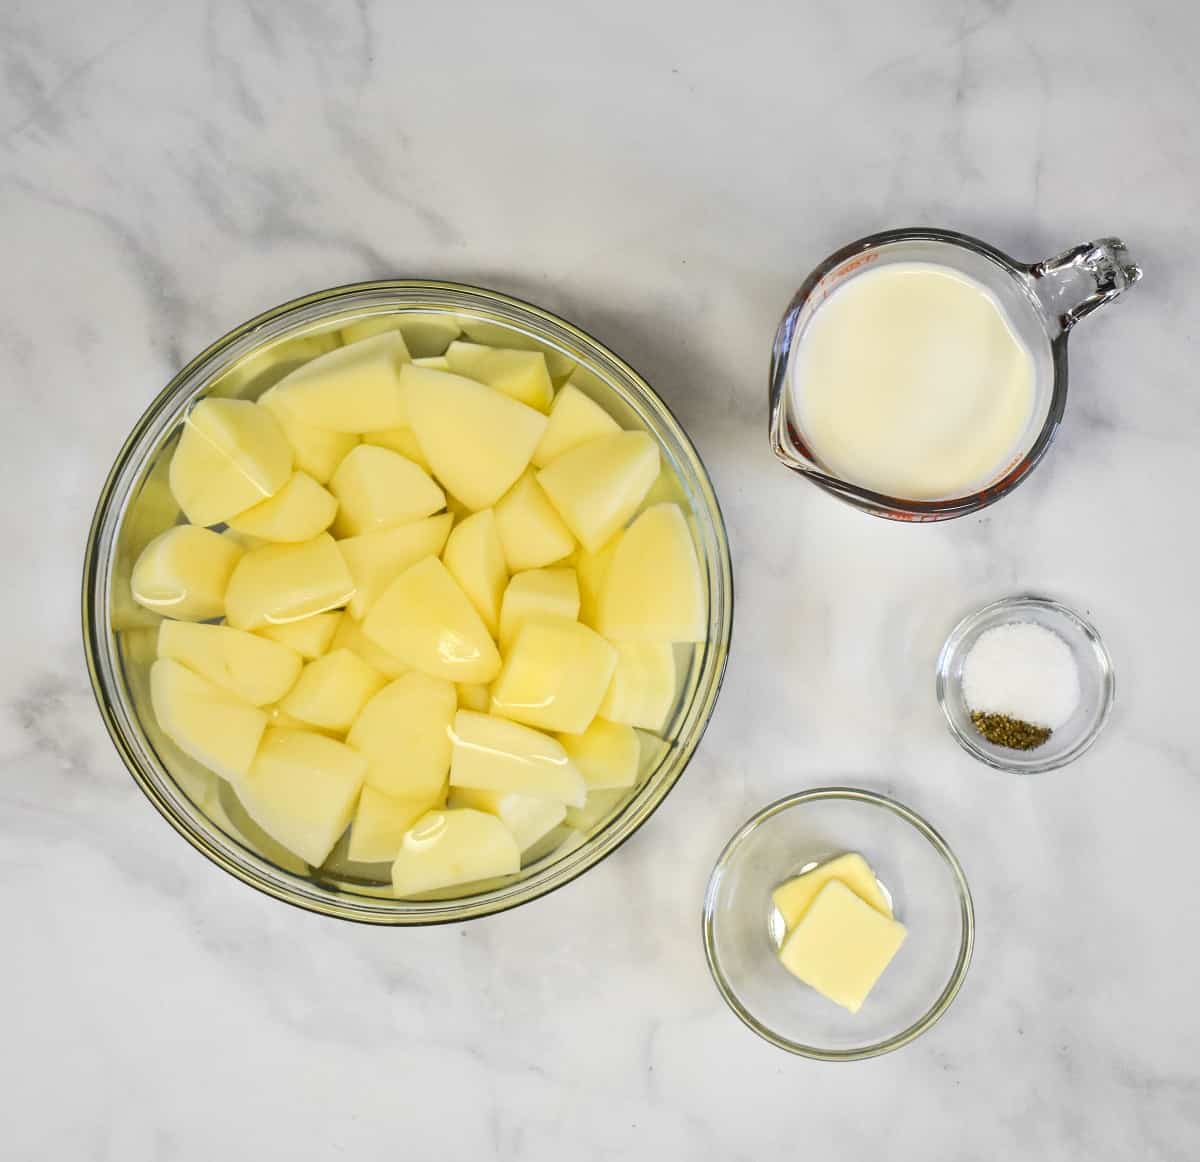 The ingredients for the mashed potatoes prepped and arranged on a white table.